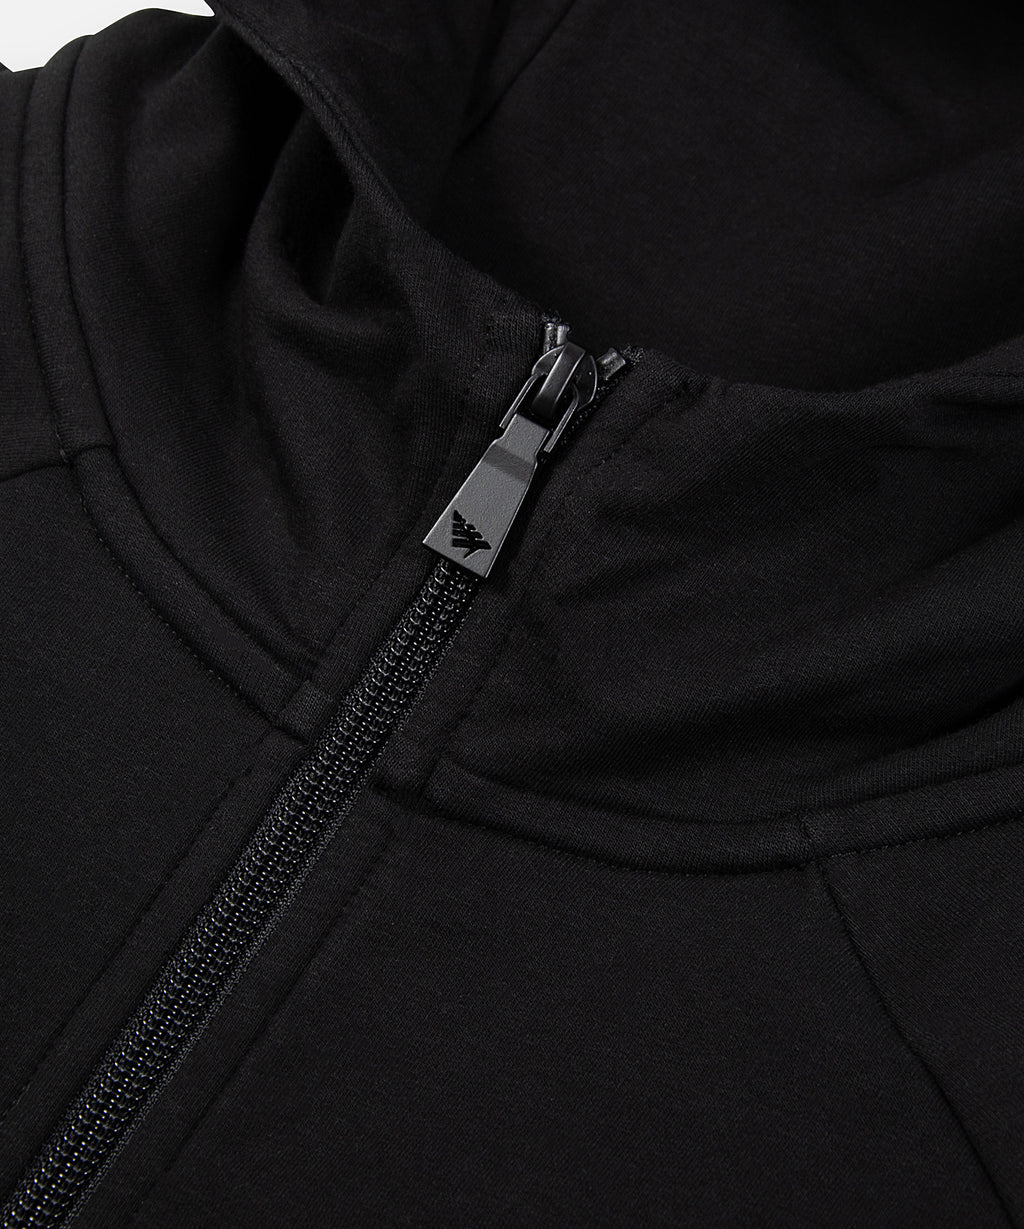  Zipper and zipper pull on Paper Planes Full Zip Hoodie, color Black.